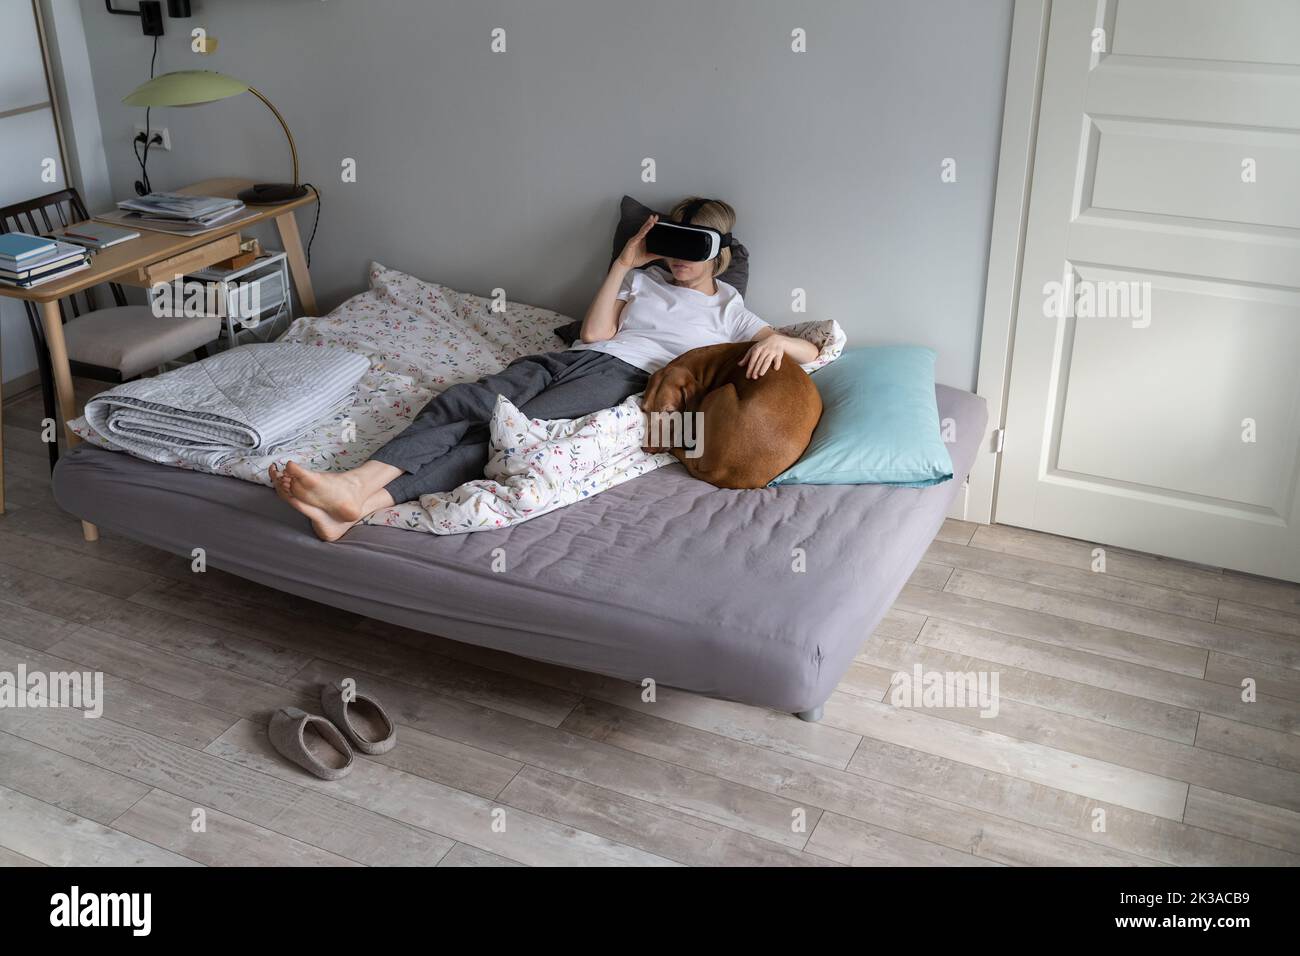 Lonely middle-aged woman wearing glasses and hugging vizsla dog plays VR games lying on unmade bed Stock Photo